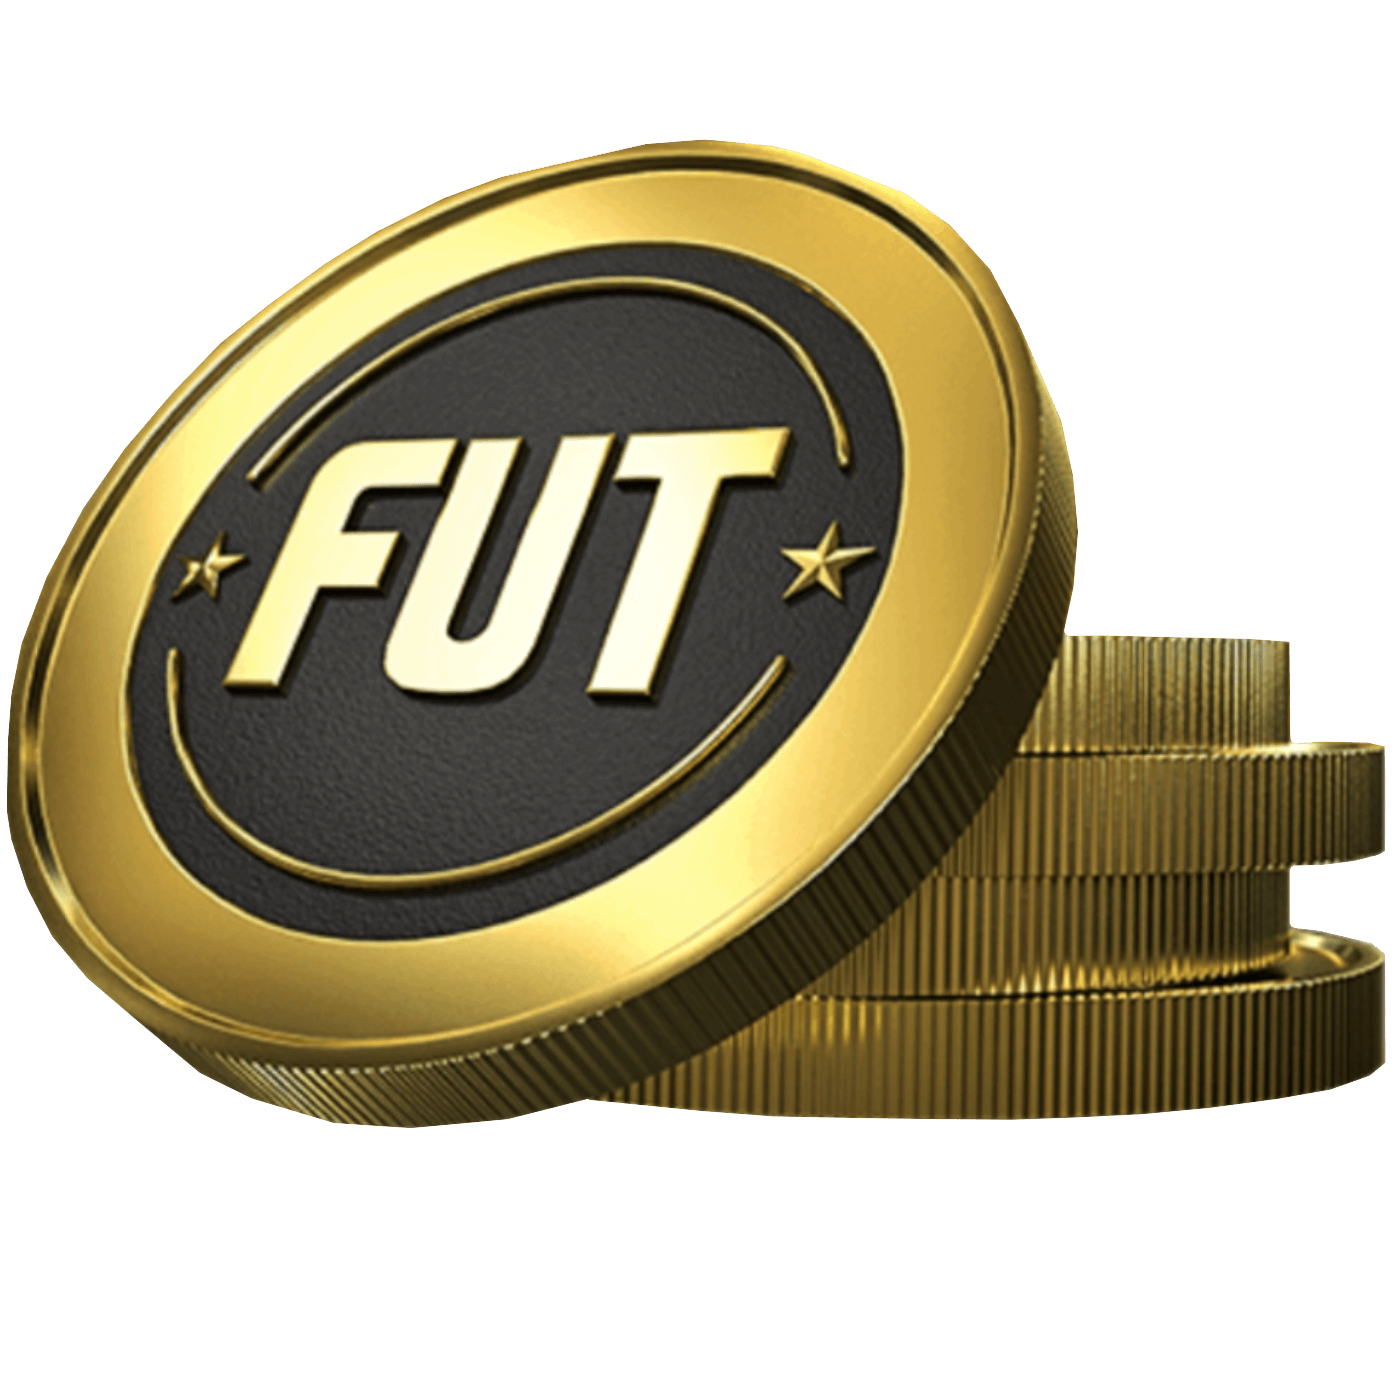 Coins in FC24 FIFA 24